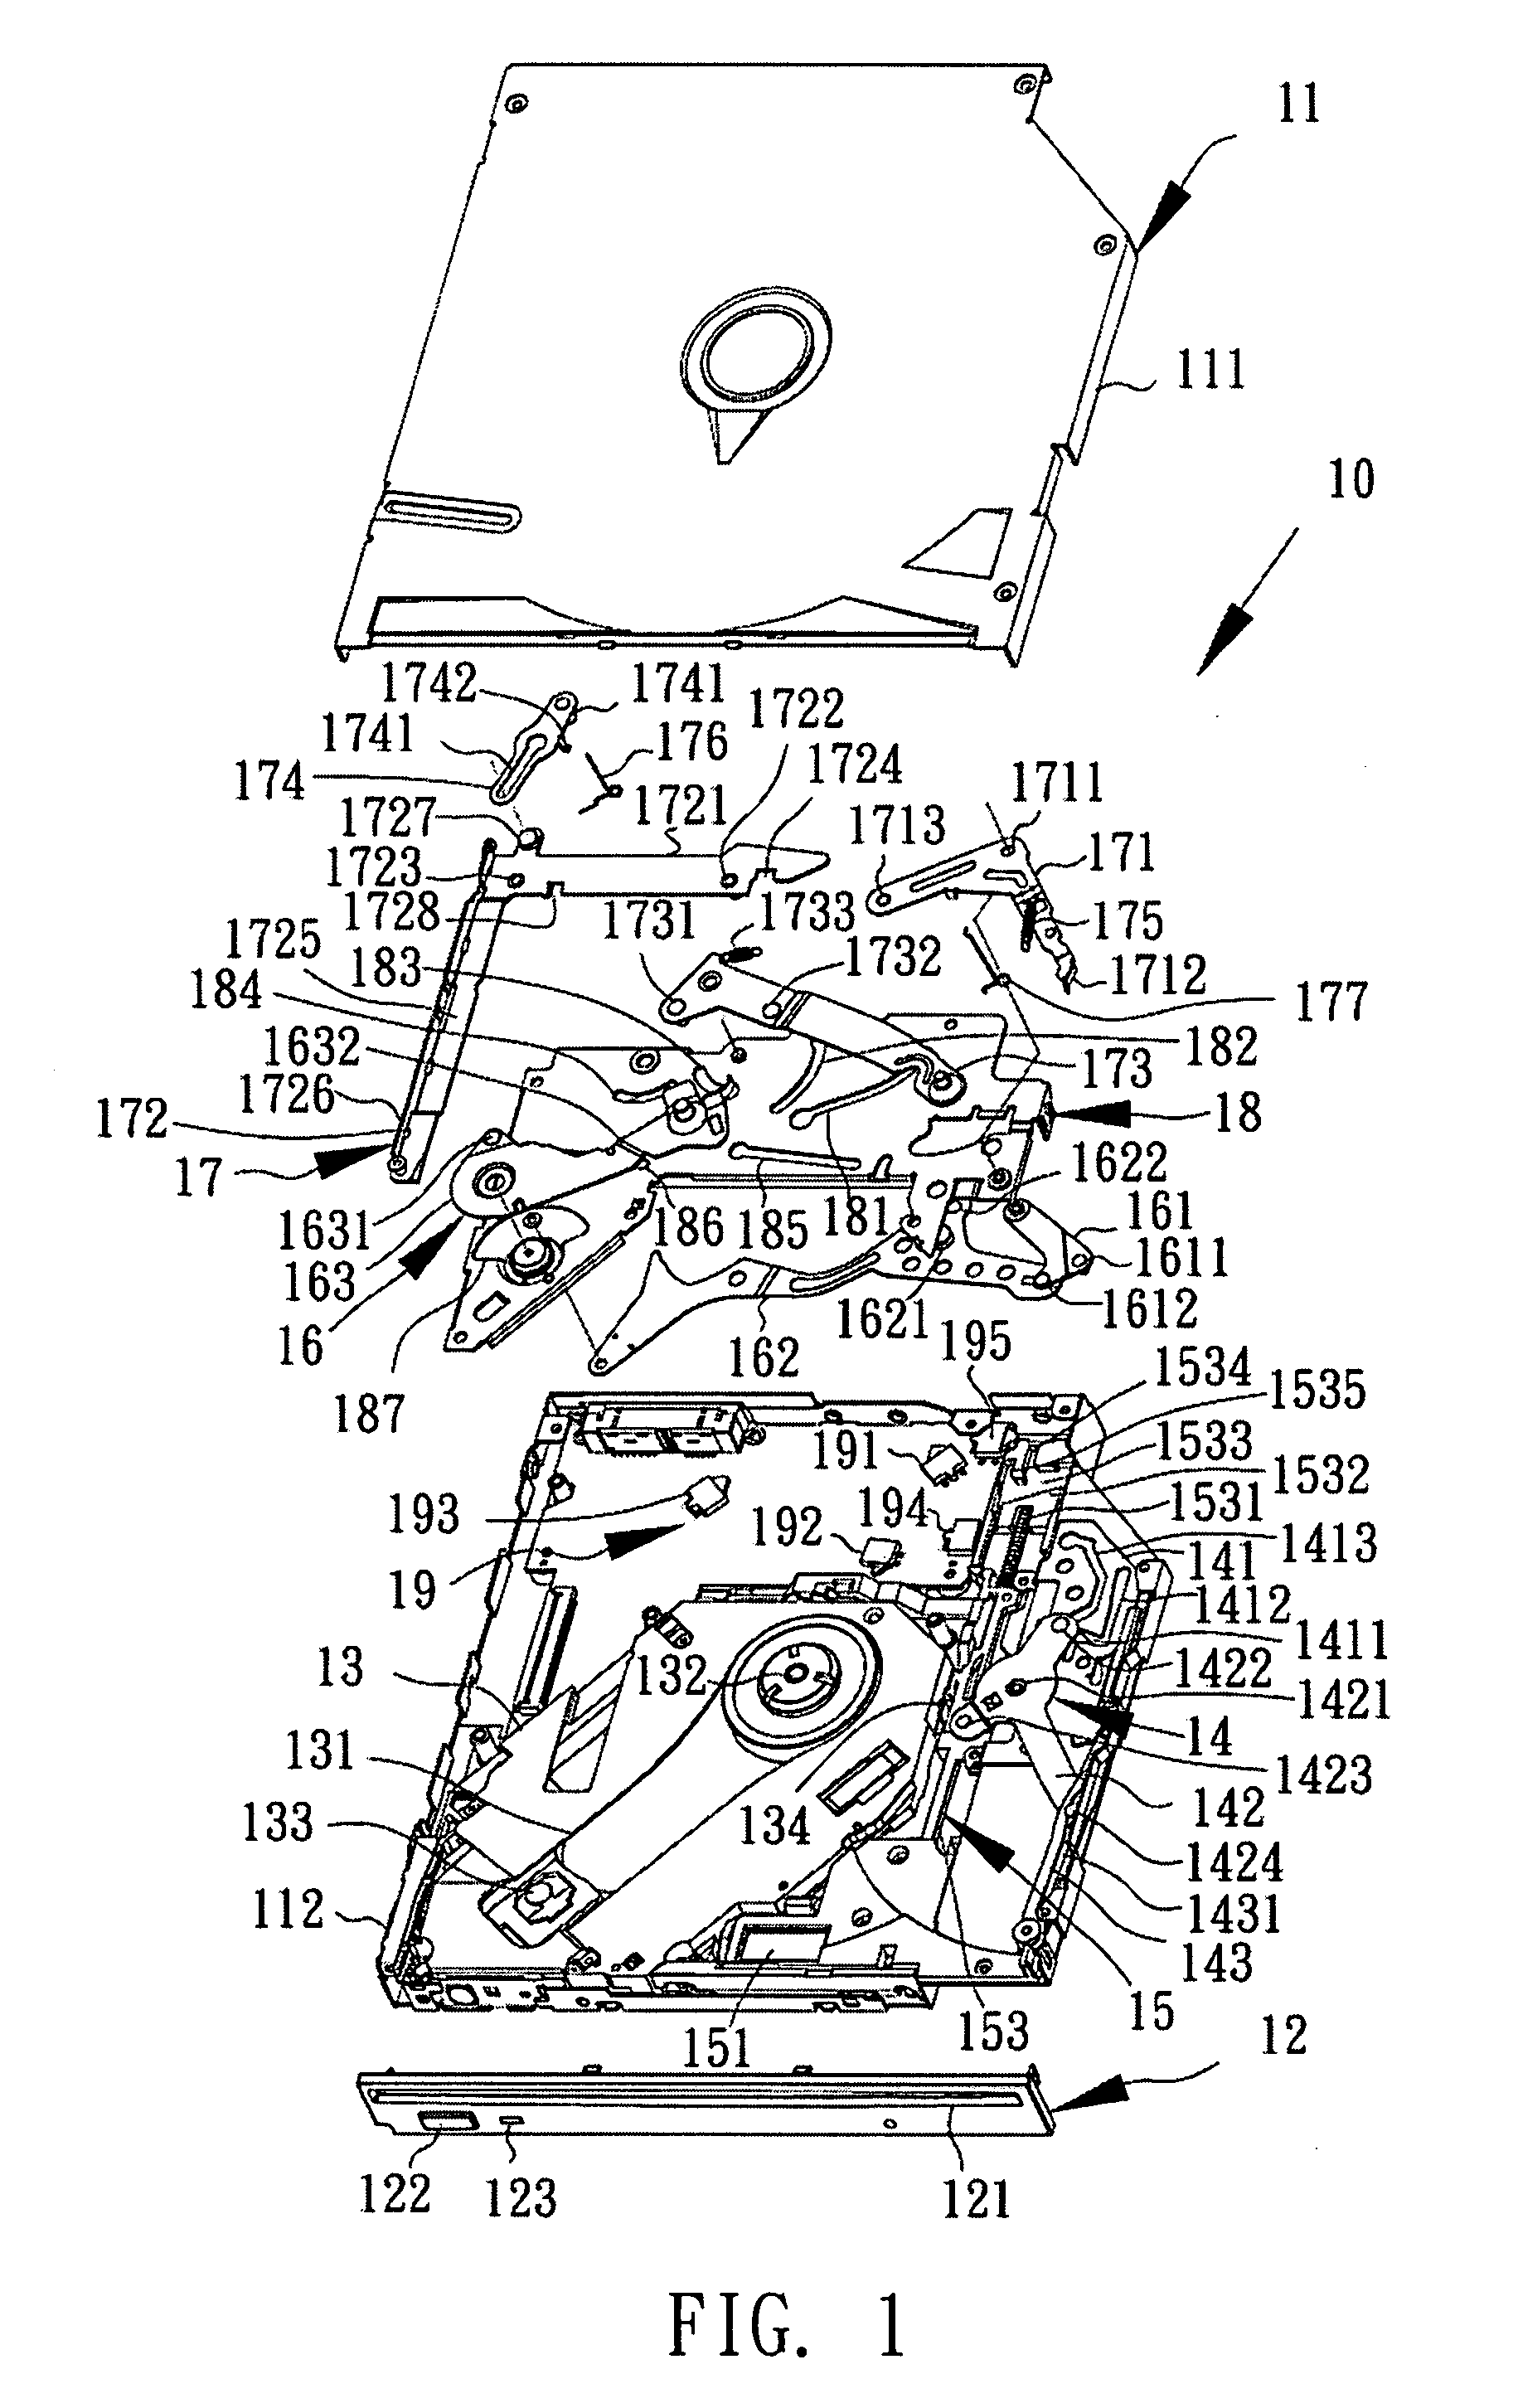 Slot-in disk drive device